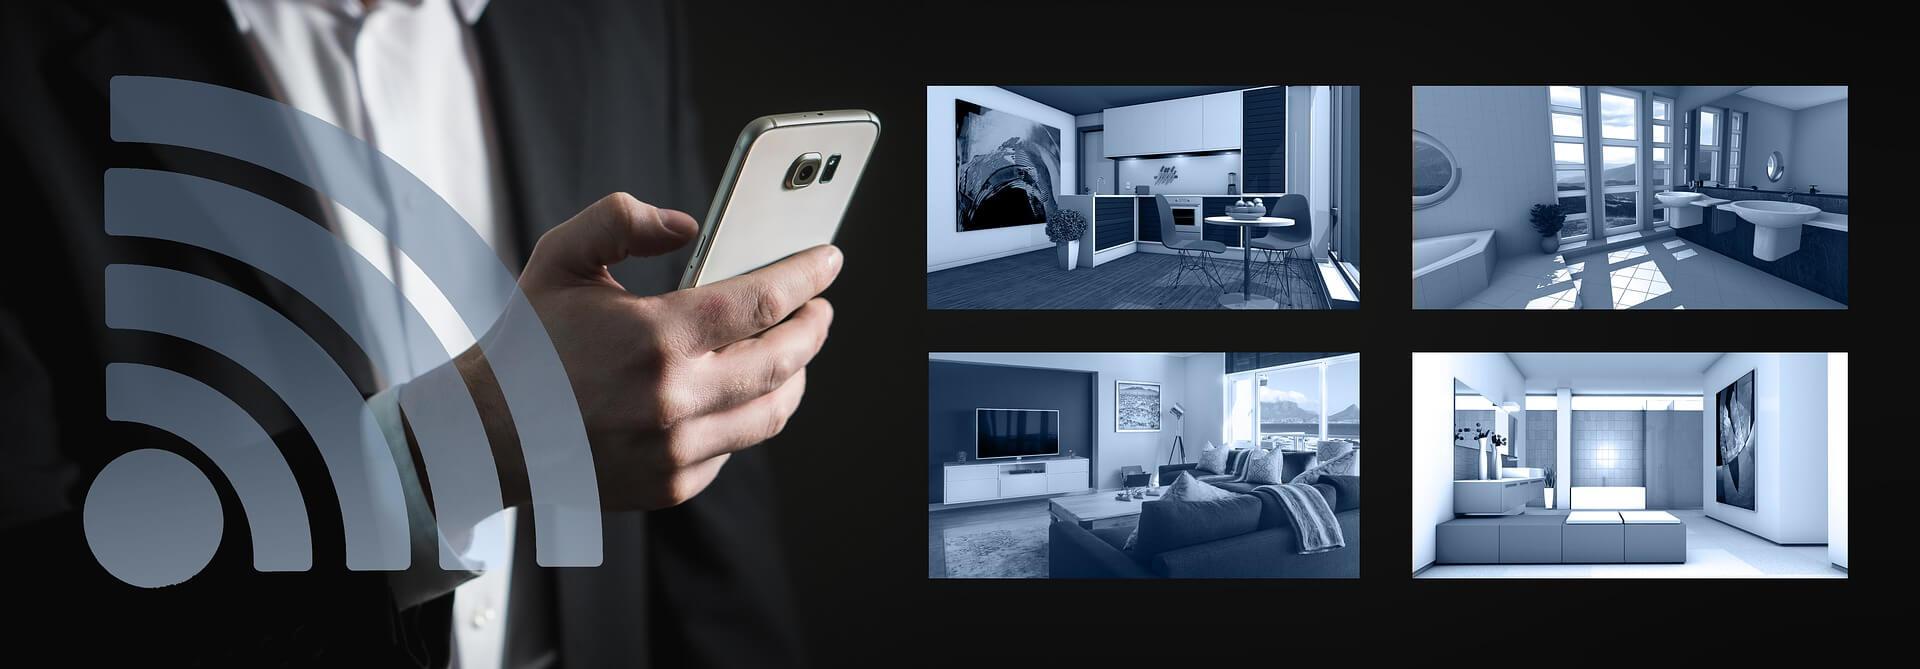 Smart Home Automation System – Unified Technology Solution